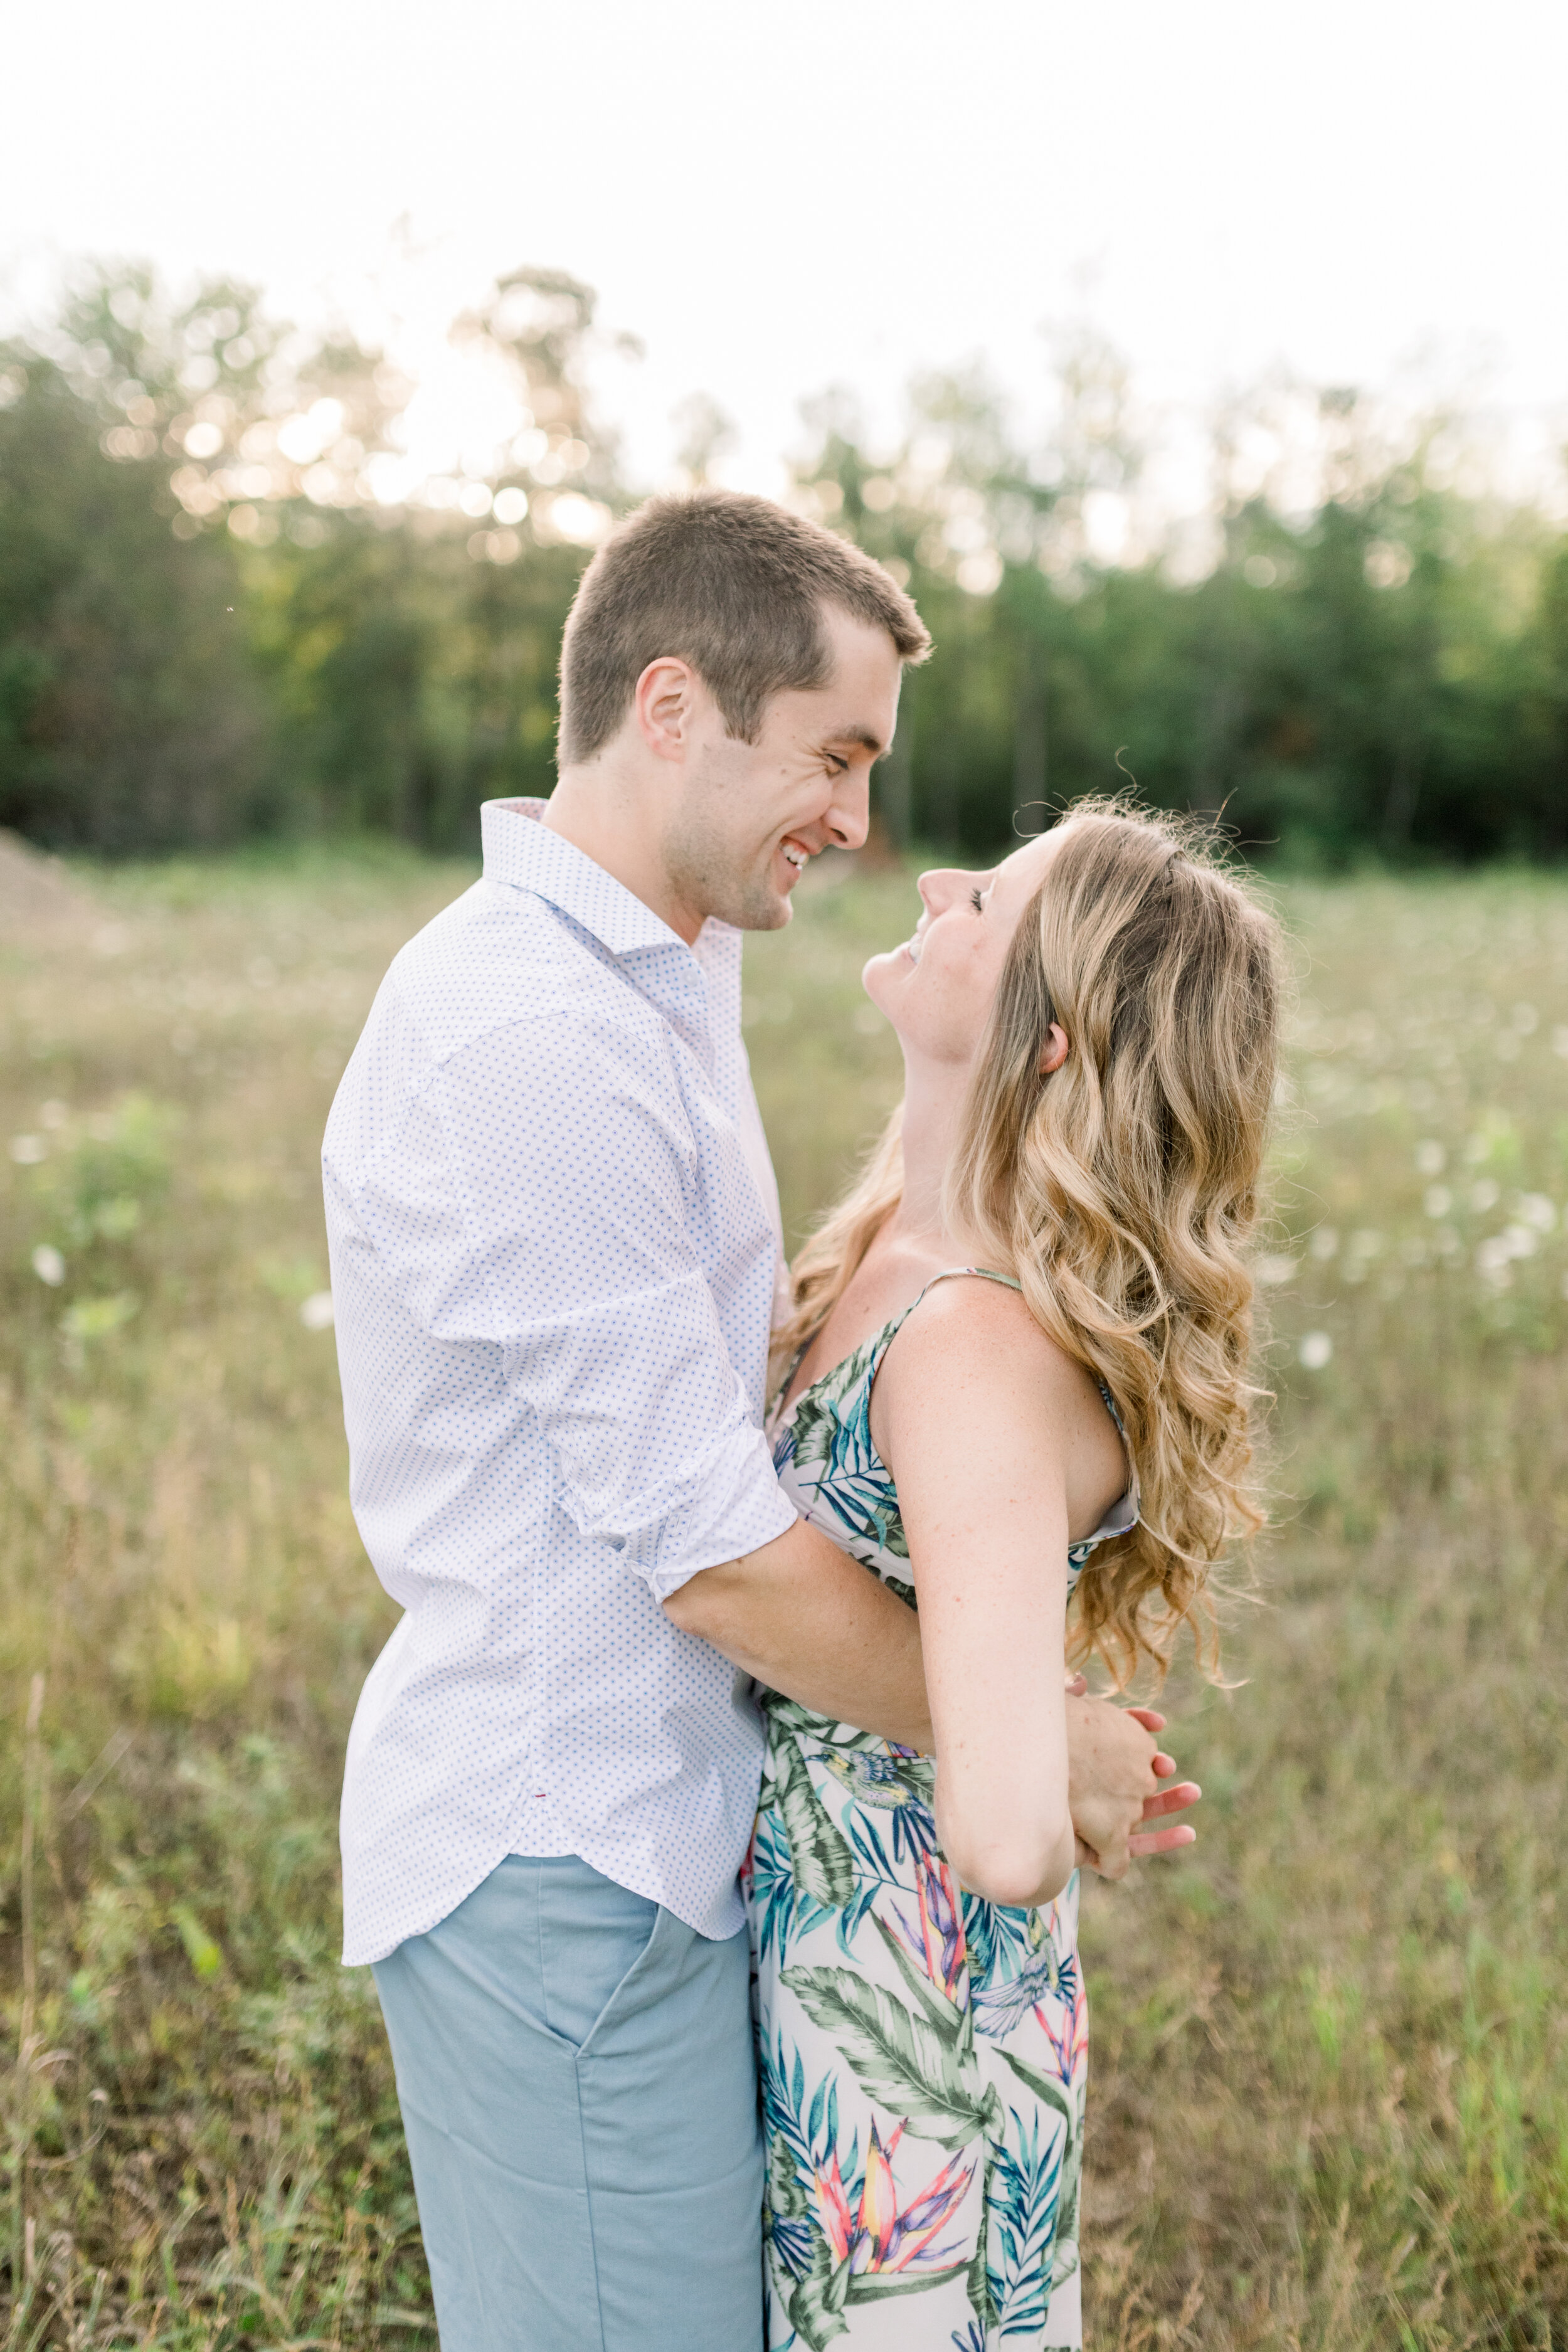  With his arms linked behind her back, Ottawa, Canada’s Chelsea Mason Photography captures an elated groom beaming down at his bride during this wildflower engagement session. hugging engaged couple, wildflower field ottawa canada, rolled up long sle